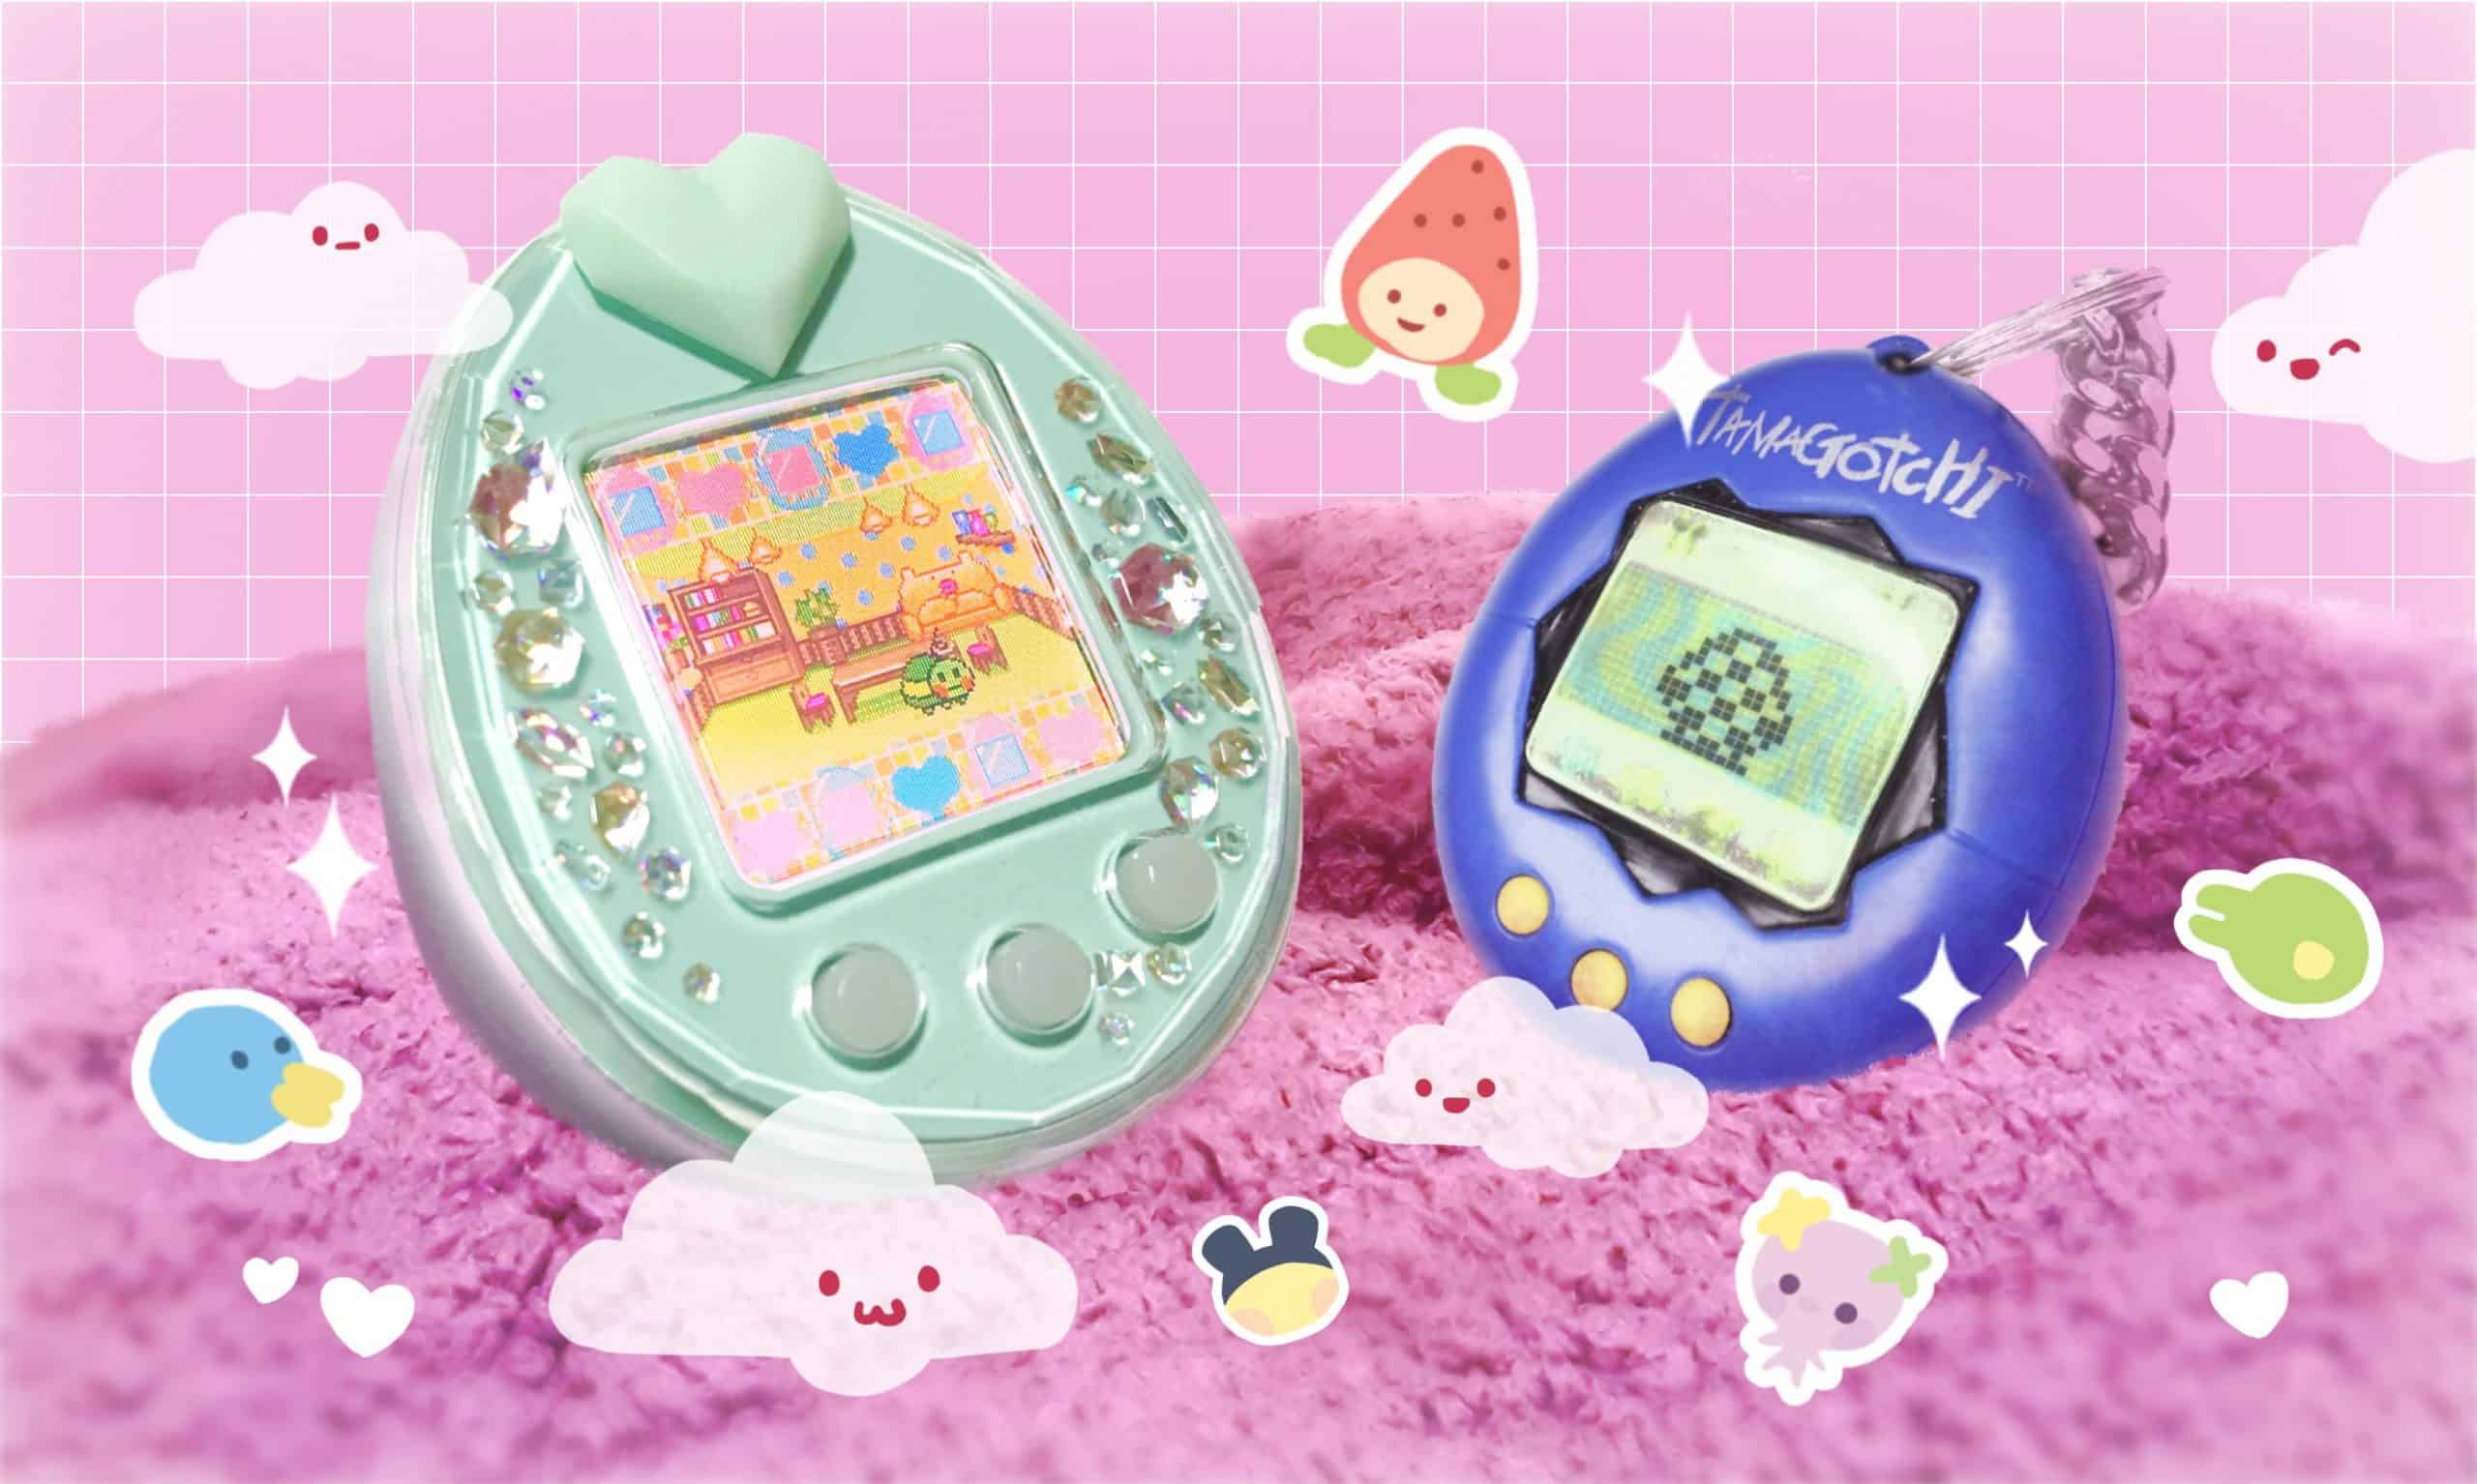 Ved navn Ultimate telefon What Is a Tamagotchi, and Why Was It So Popular? – 90s Toys